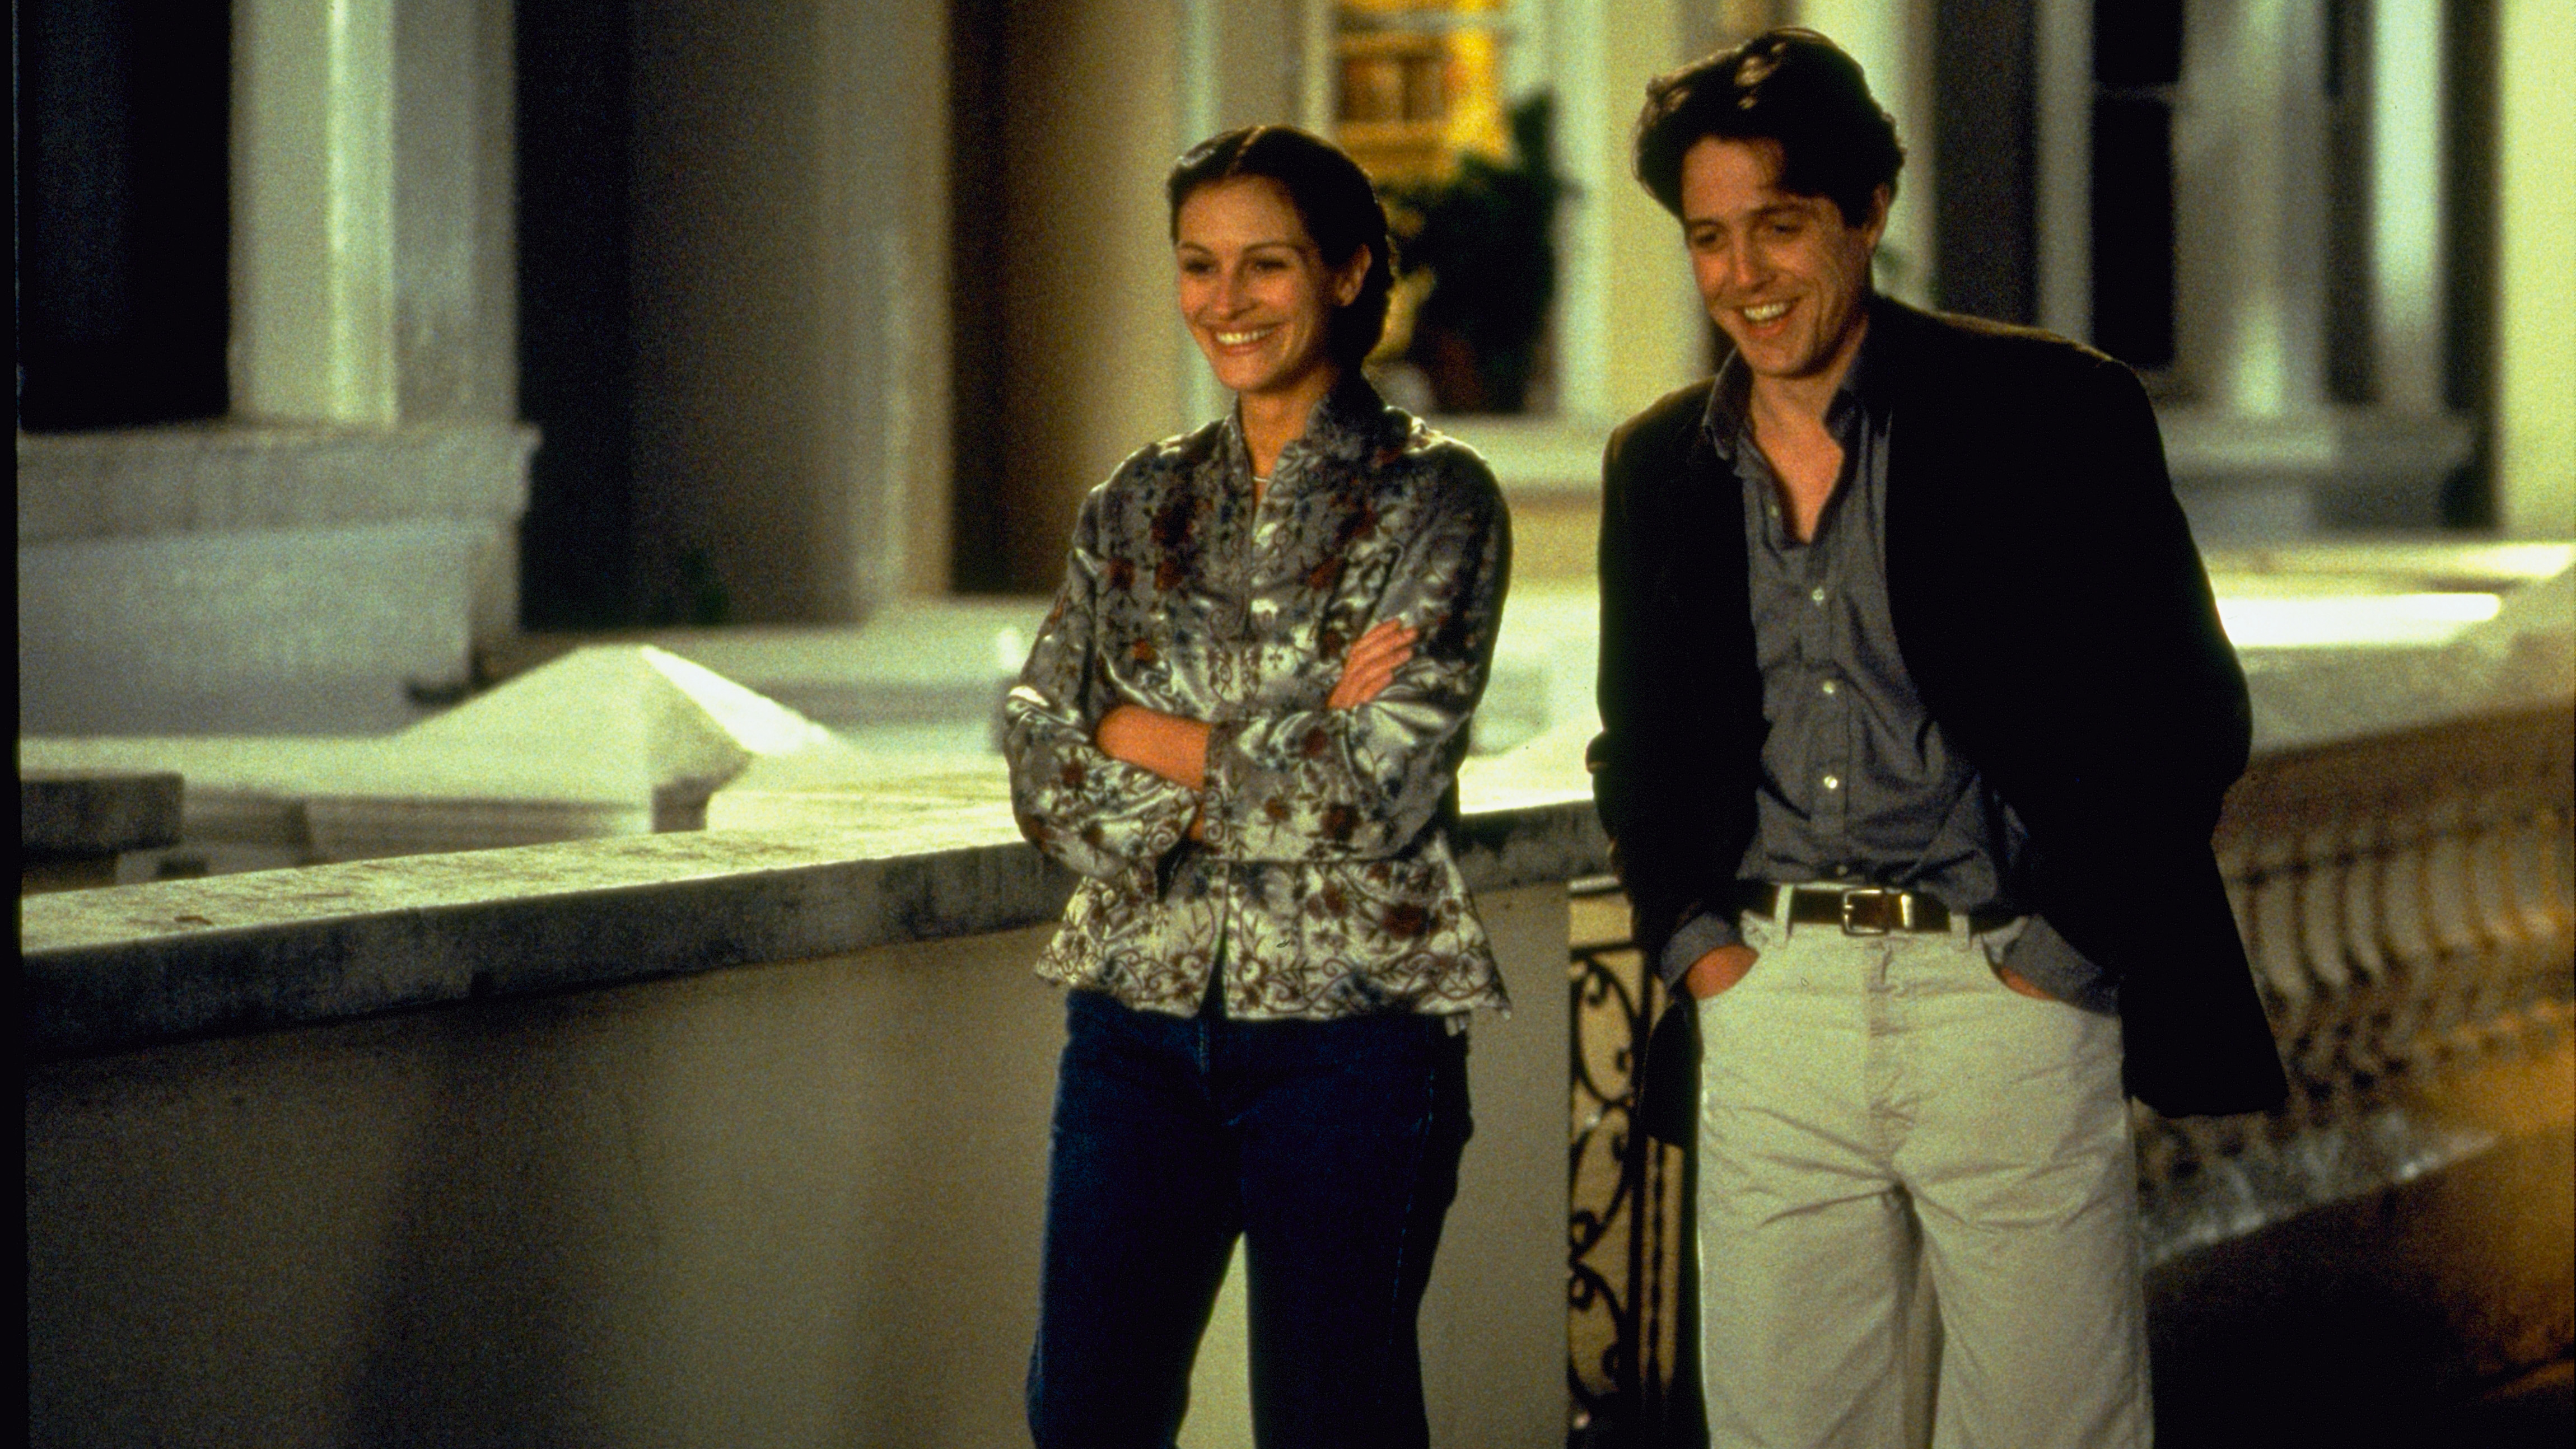 A still from the movie Notting Hill in which Hugh Grant plays Will Thaker and Julia Roberts plays Anna Scott, they’re both walking down a street in London smiling.